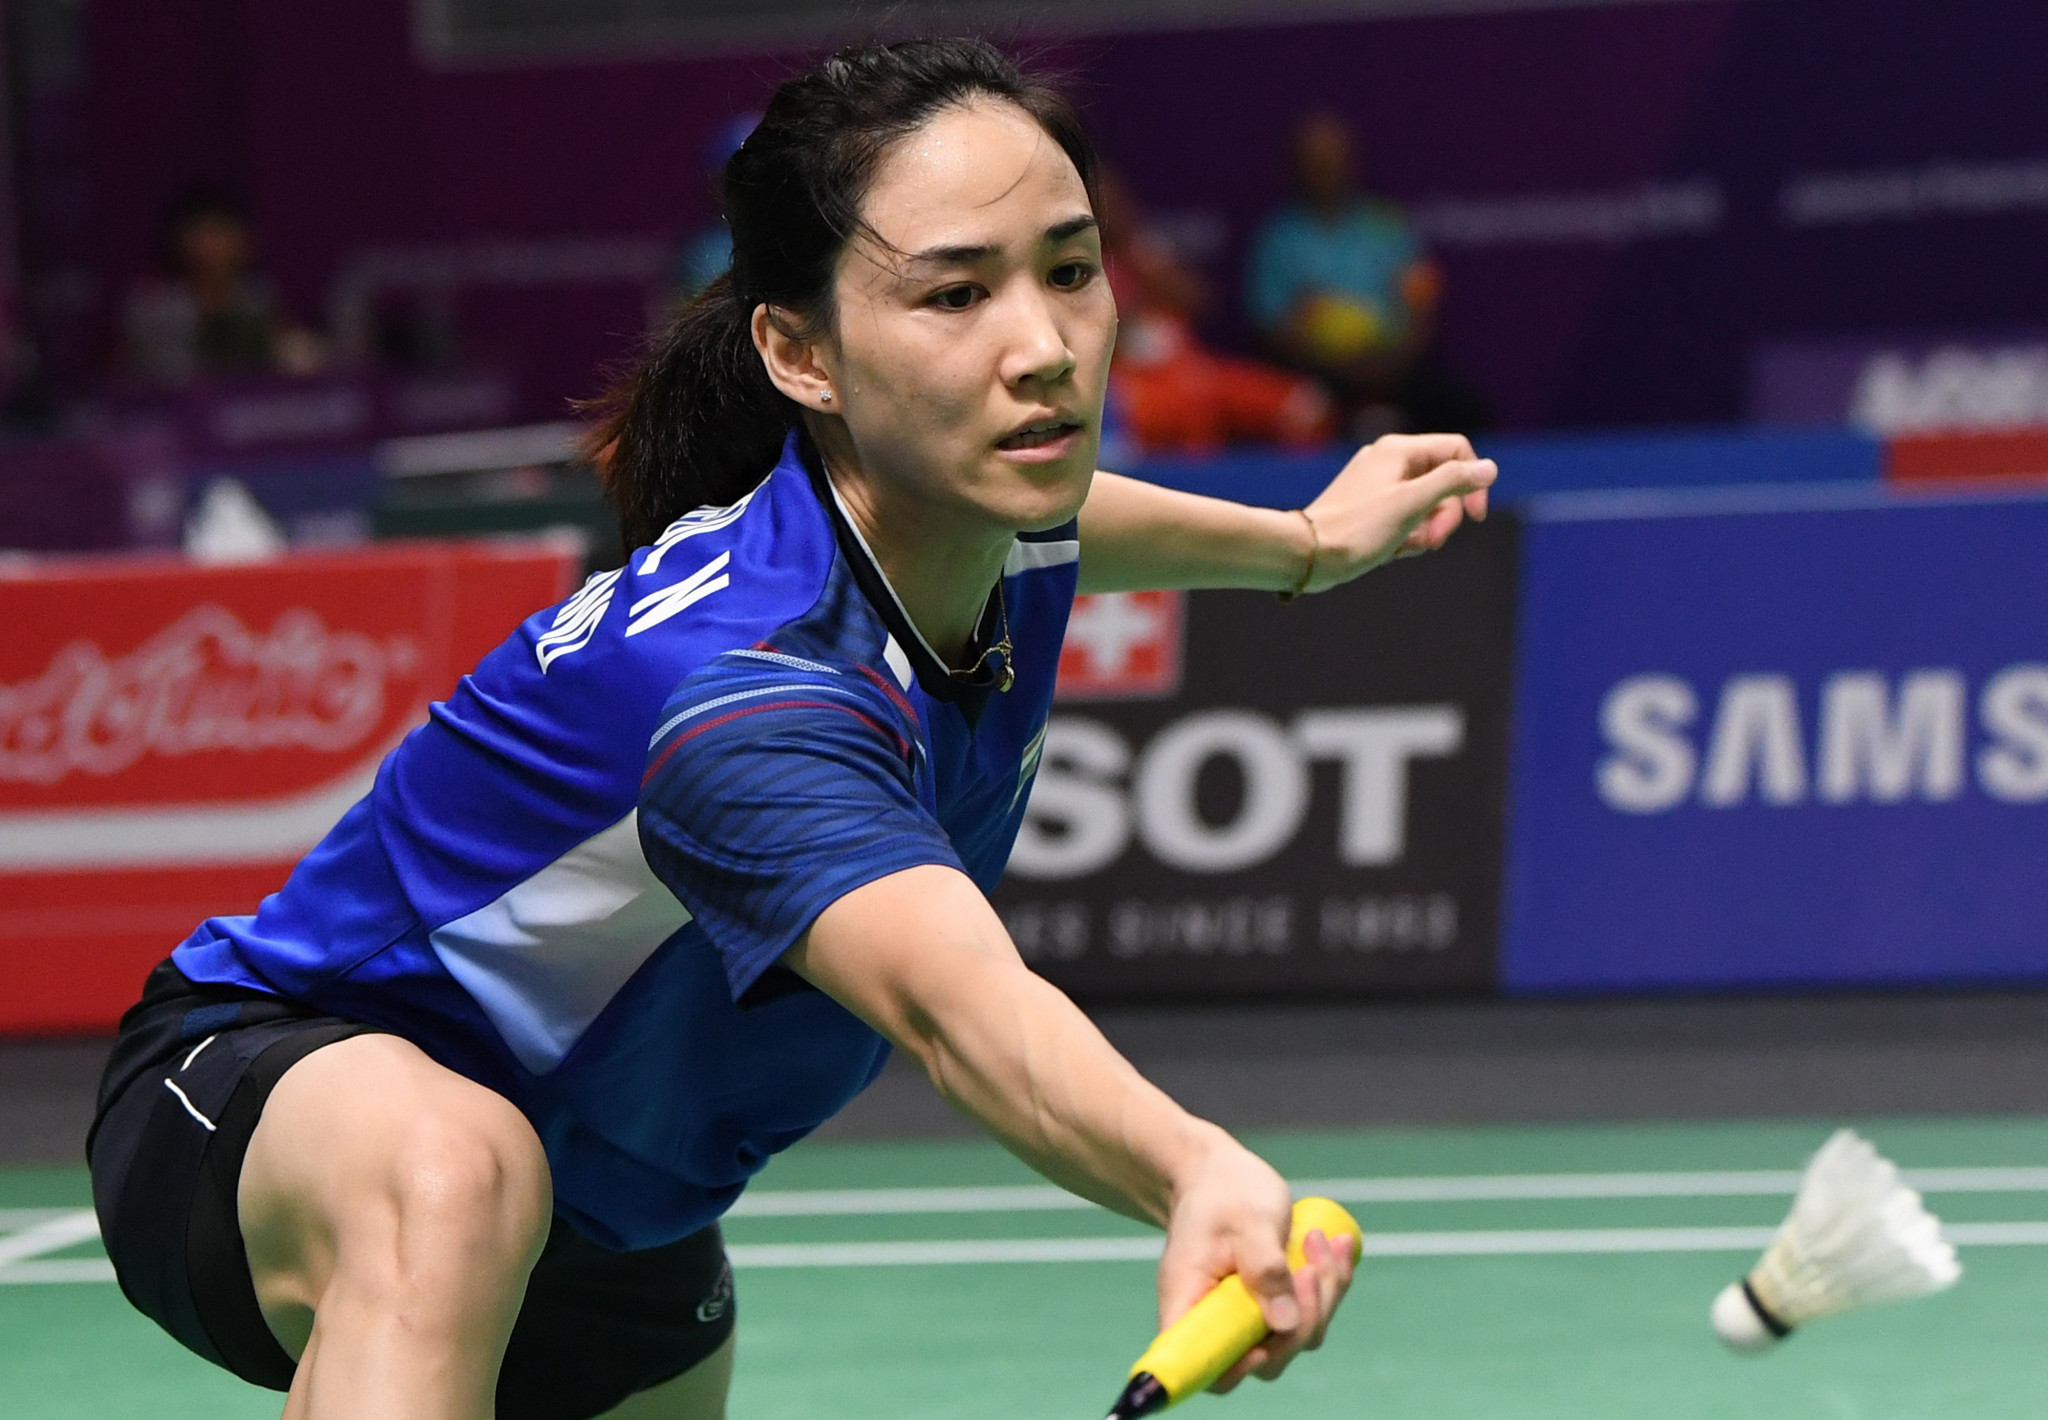 Third seed Nitchaon Jindapol has been eliminated from the women's singles event ©Getty Images